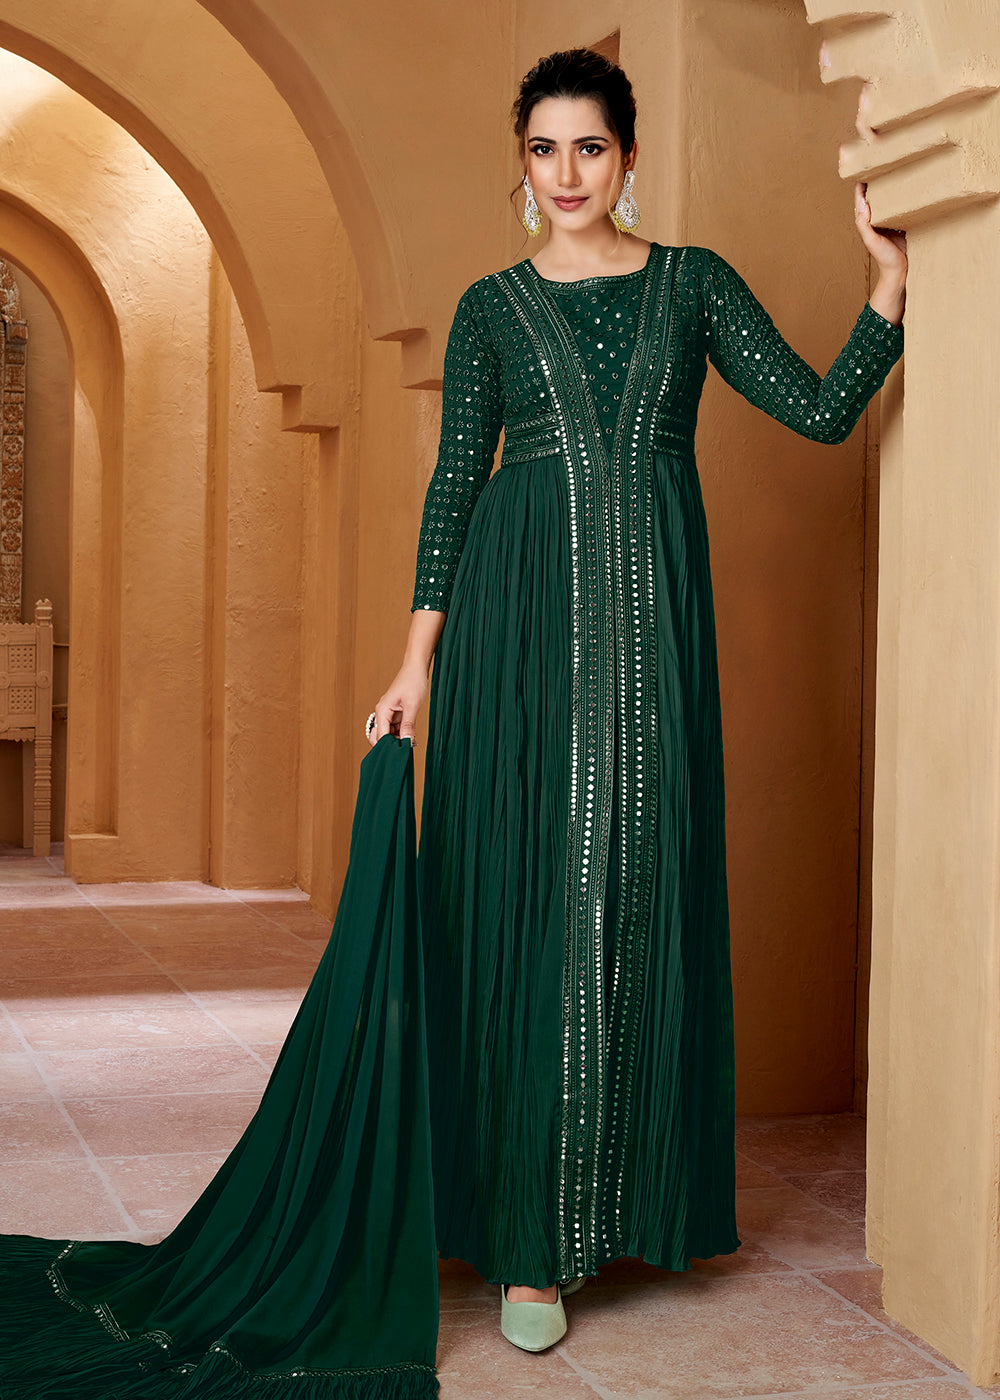 Buy Now Green Crushed Georgette Mirror Lucknowi Work Anarkali Dress Online in USA, UK, Australia, New Zealand, Canada & Worldwide at Empress Clothing. 